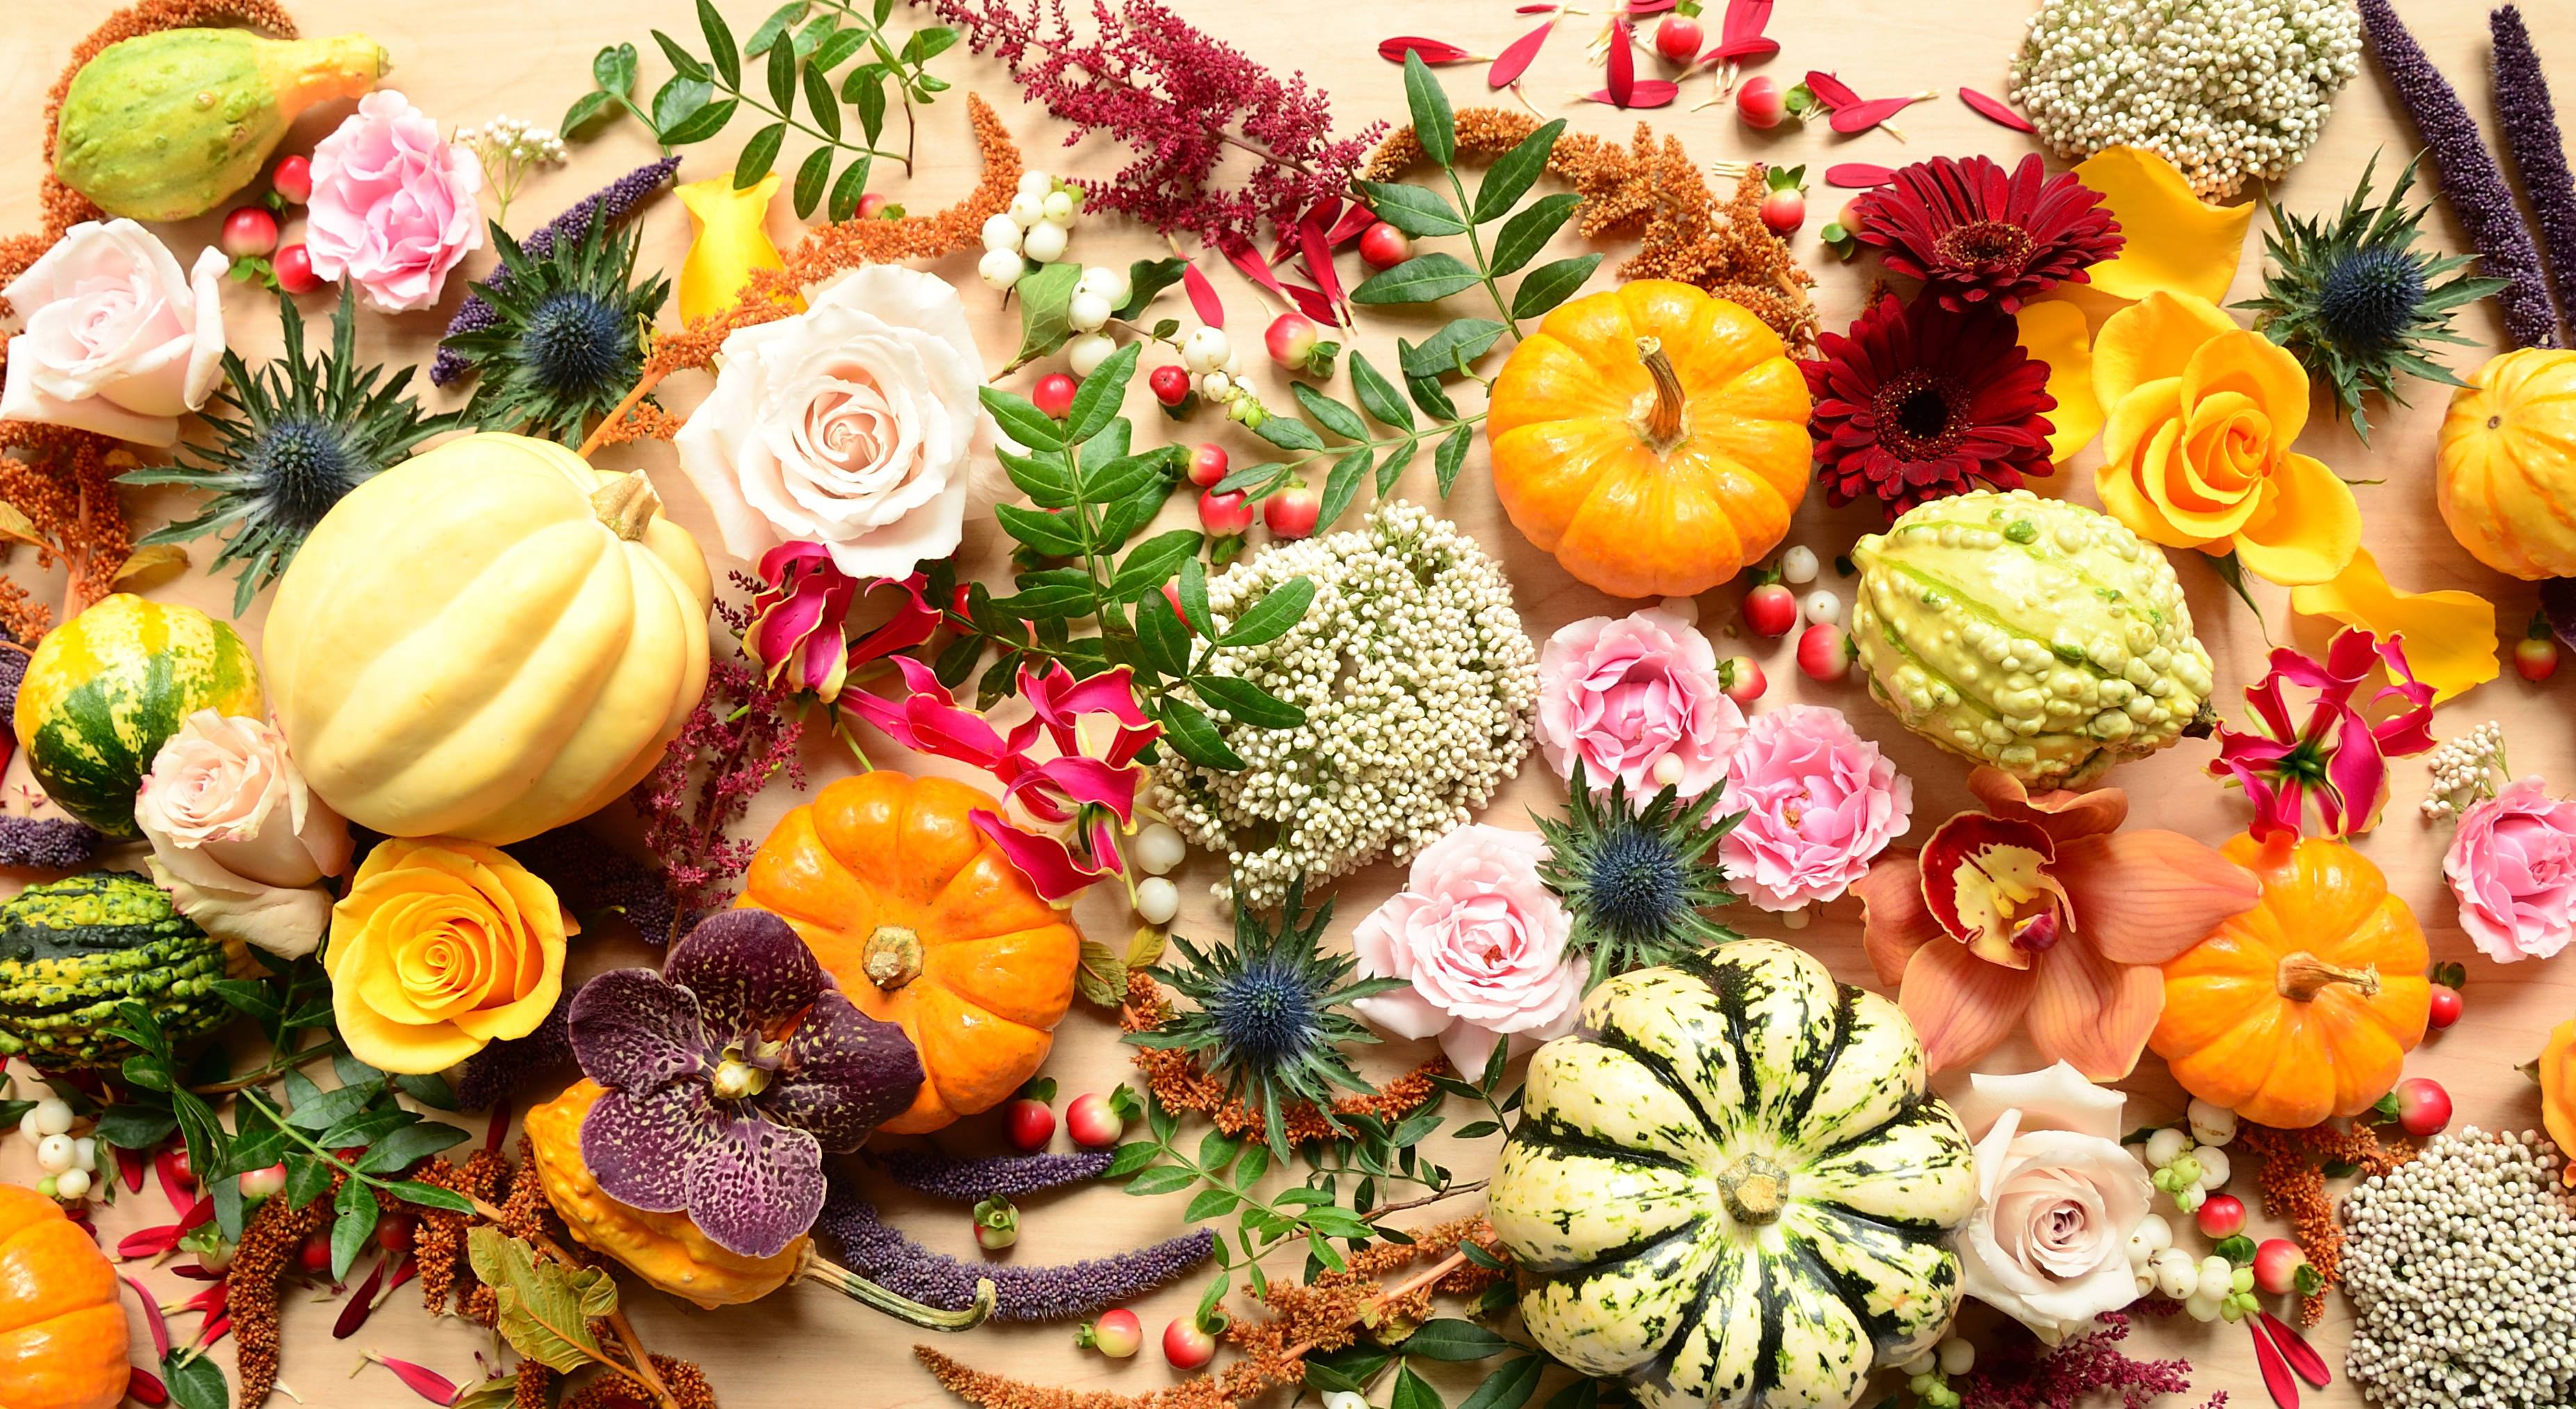 9 Fall Flowers You Can Expect to See in Floral Arrangements